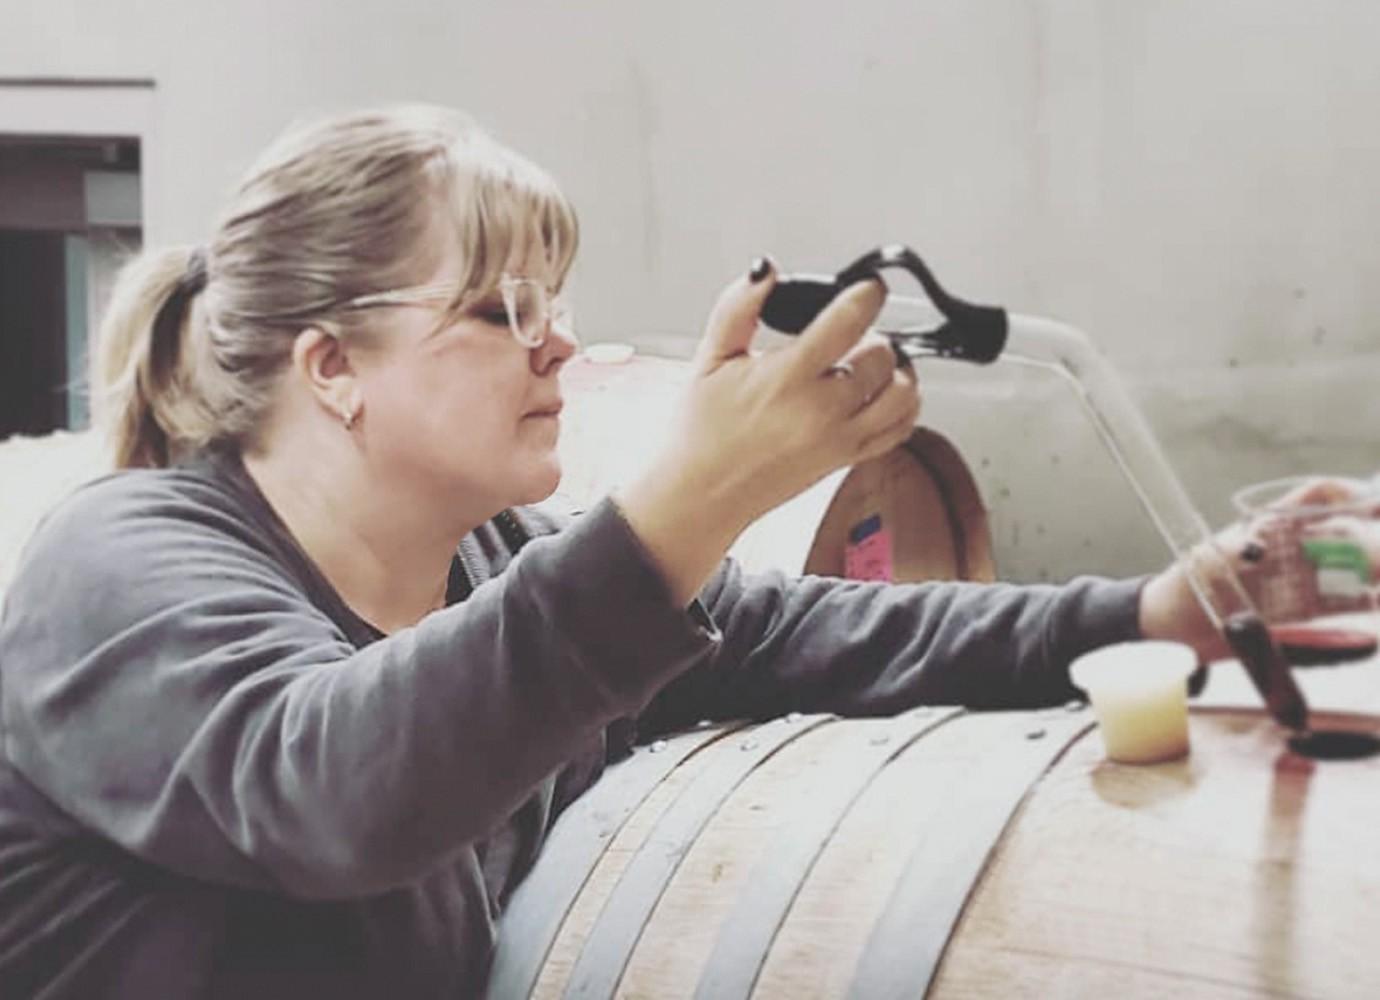 Winery Image or Video